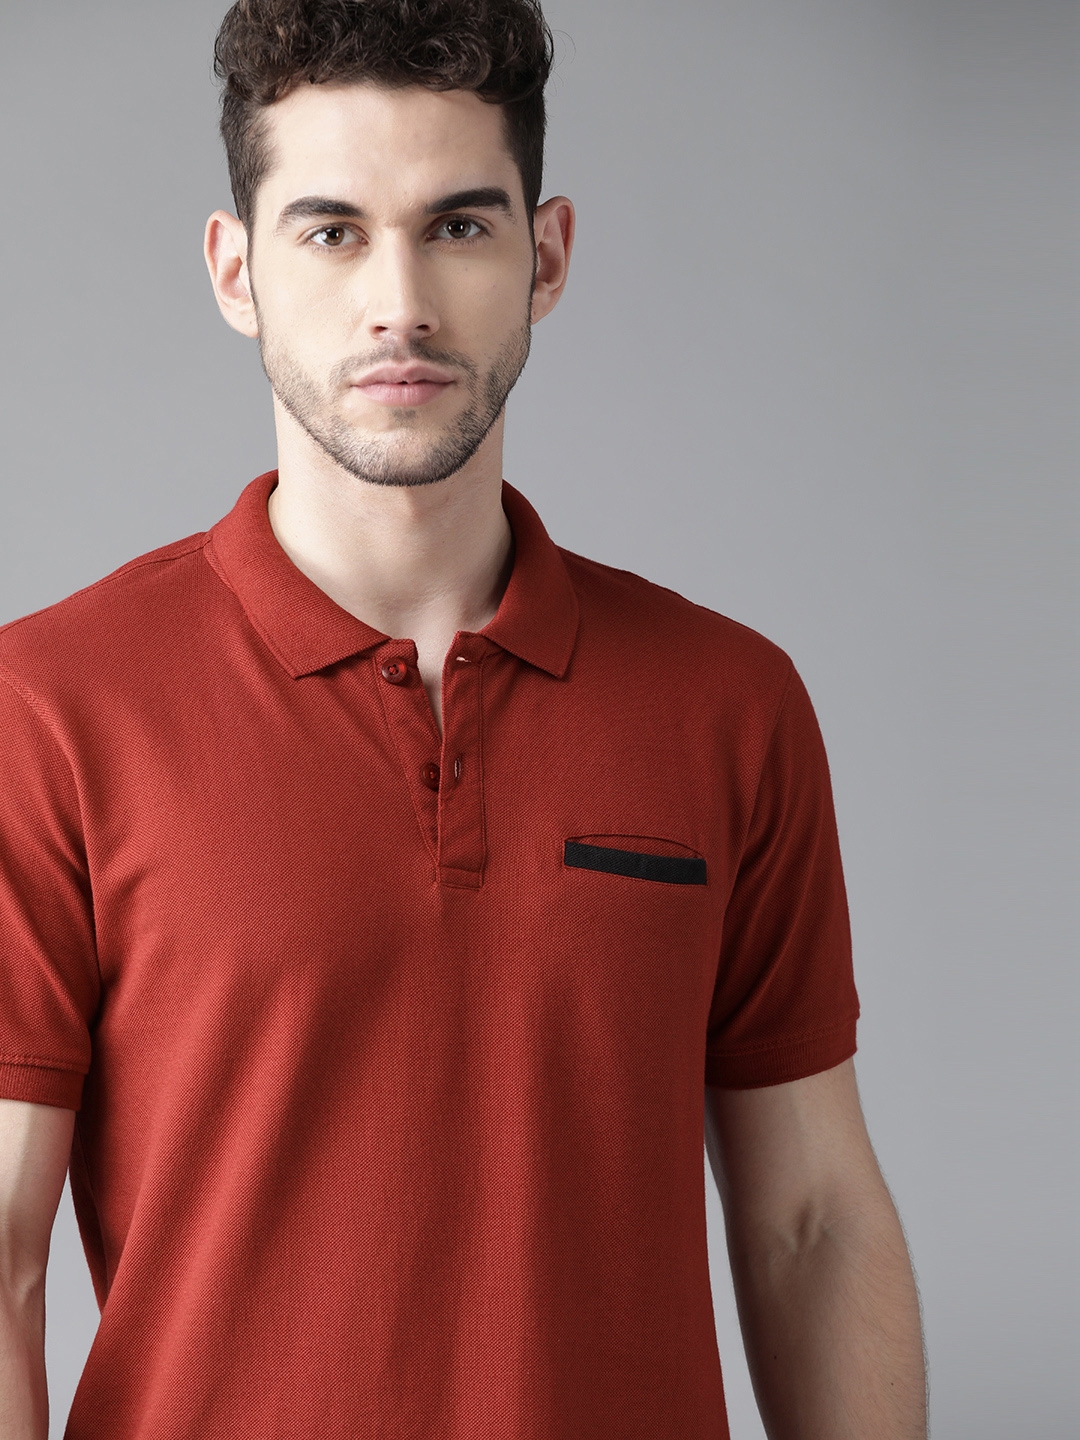 Buy The Roadster Lifestyle Co Men Rust Red Pure Cotton Solid Polo ...